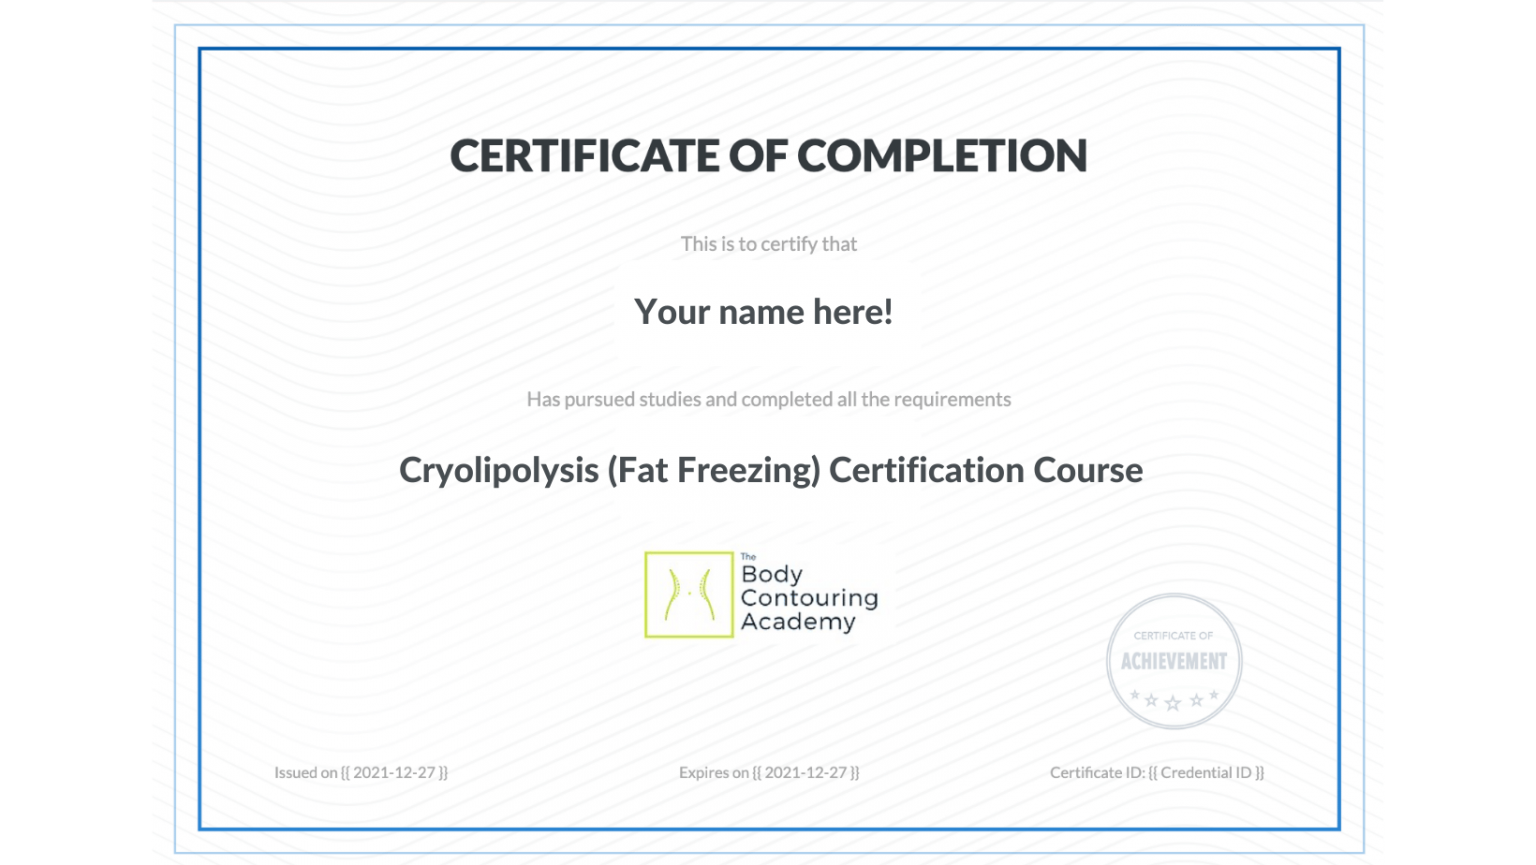 Cryolipolysis Fat Freezing Certification Course Body Contouring Academy